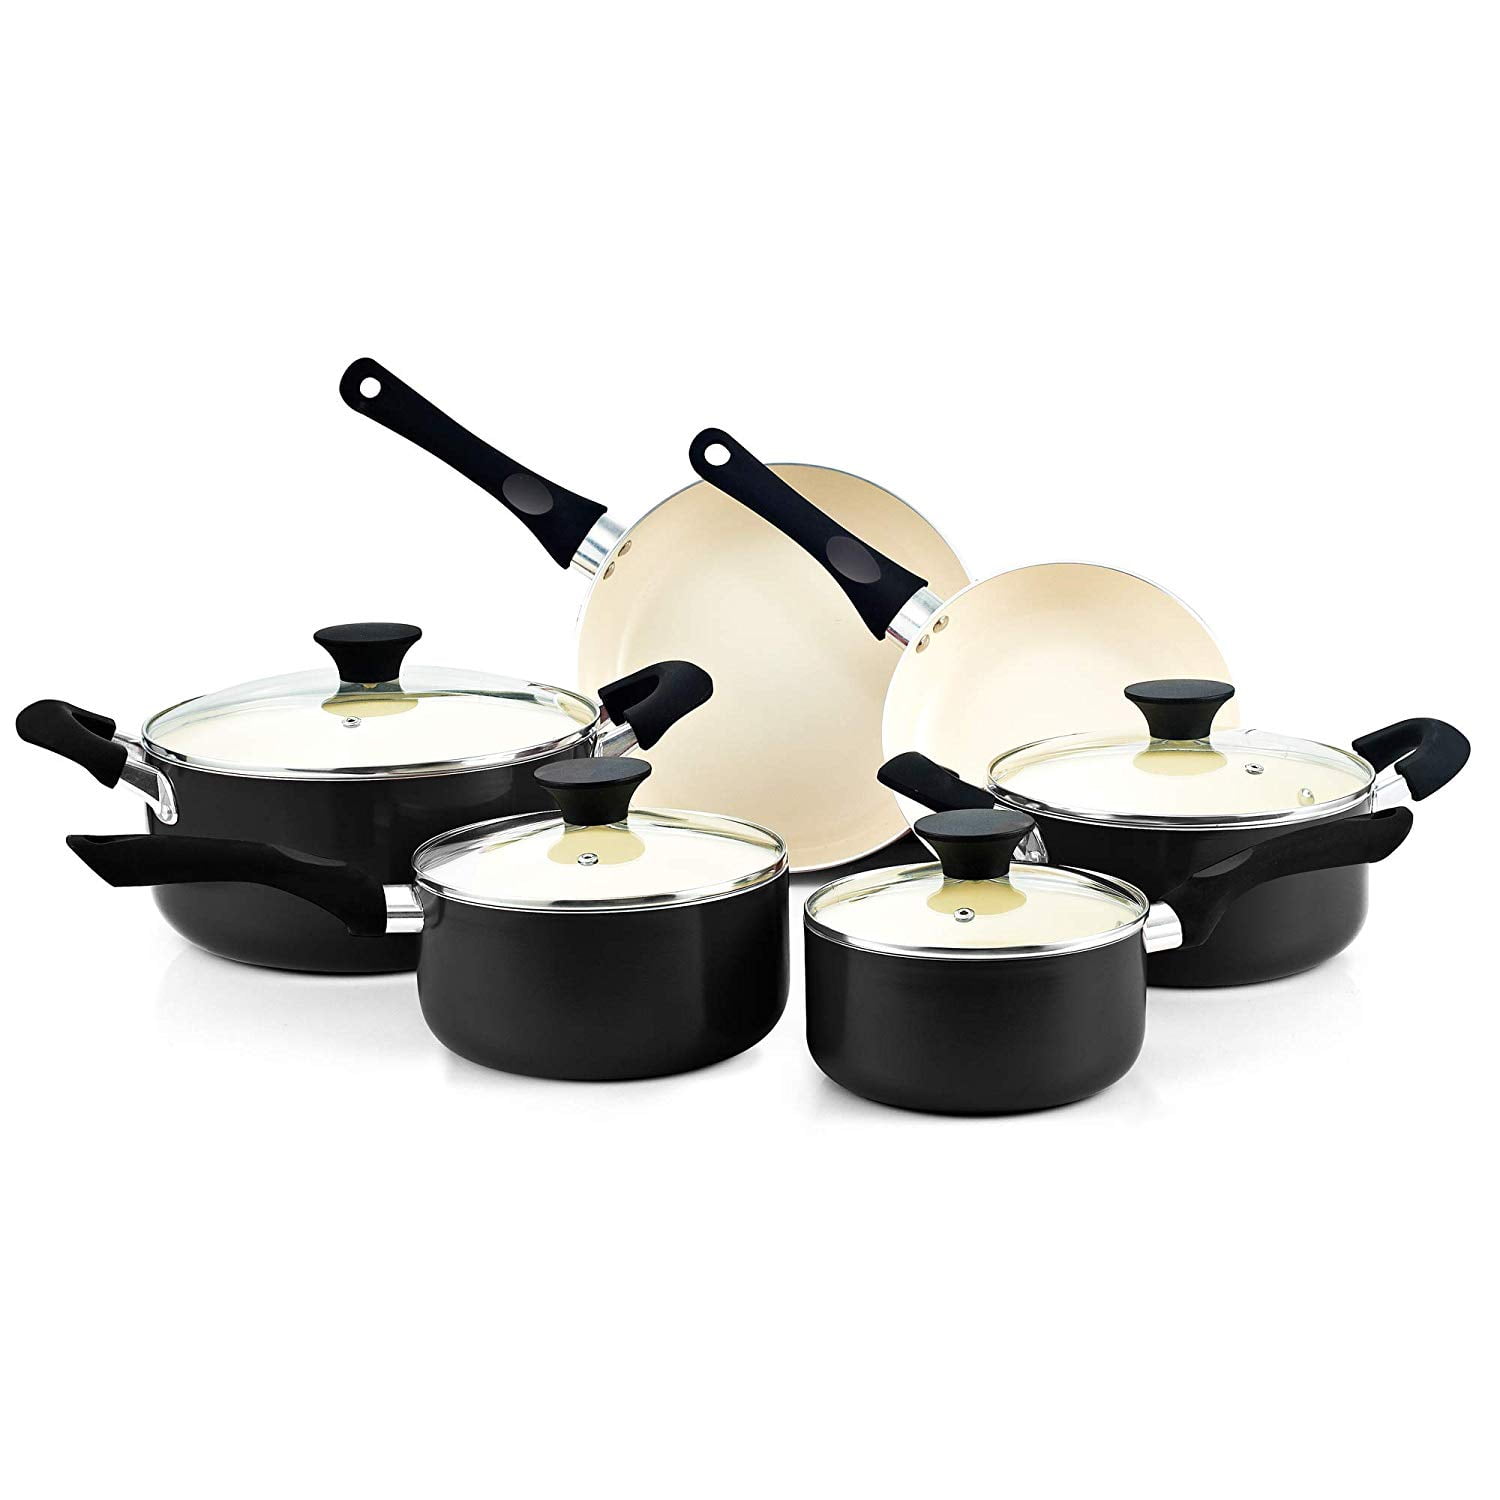 Cook N Home 10-Piece Ceramic Coating Nonstick Kitchen Cookware Sets with  Lids,Grey, set - Fry's Food Stores